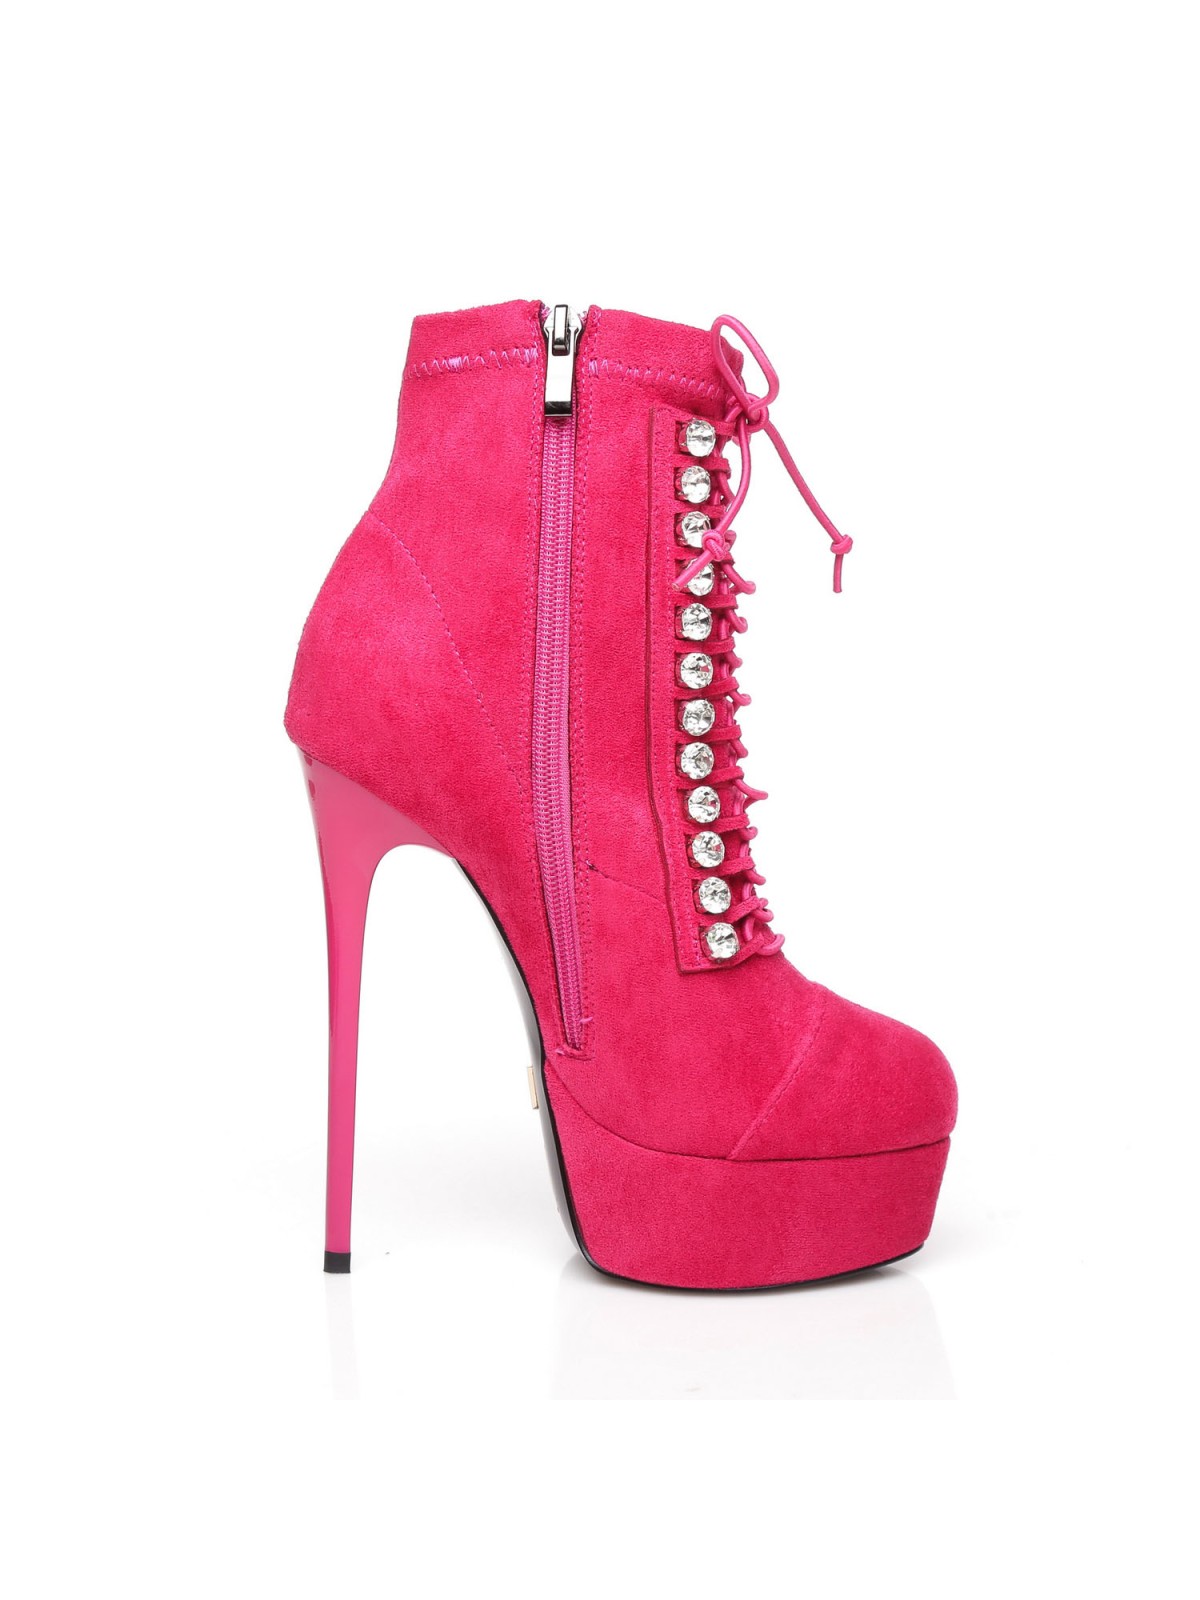 Giaro DAISIE fuhsia lace-up booties with shiny crystals